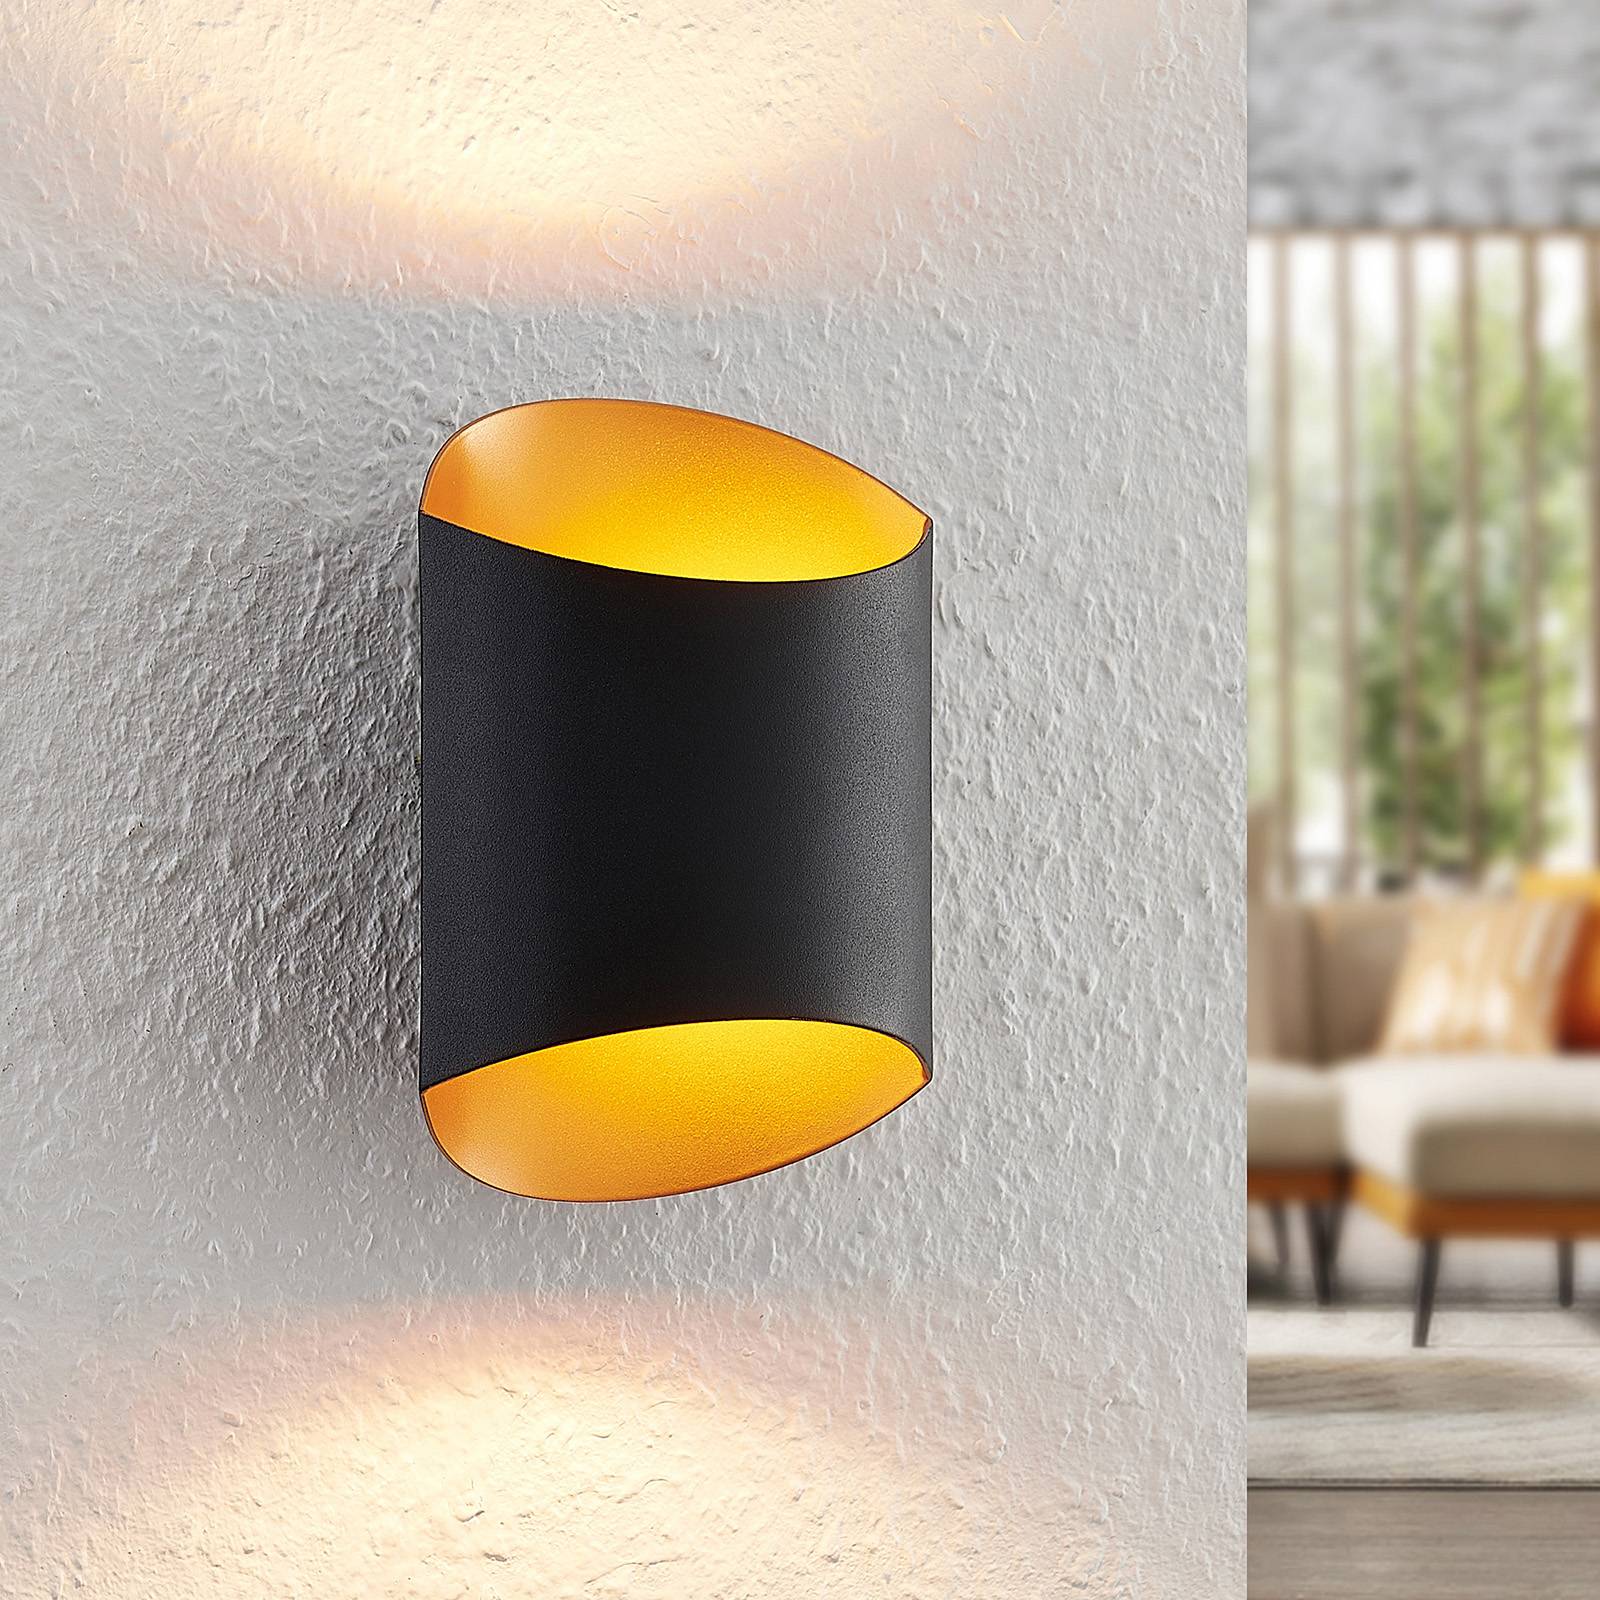 Photos - Chandelier / Lamp Arcchio Ayaz LED wall lamp, black and gold 